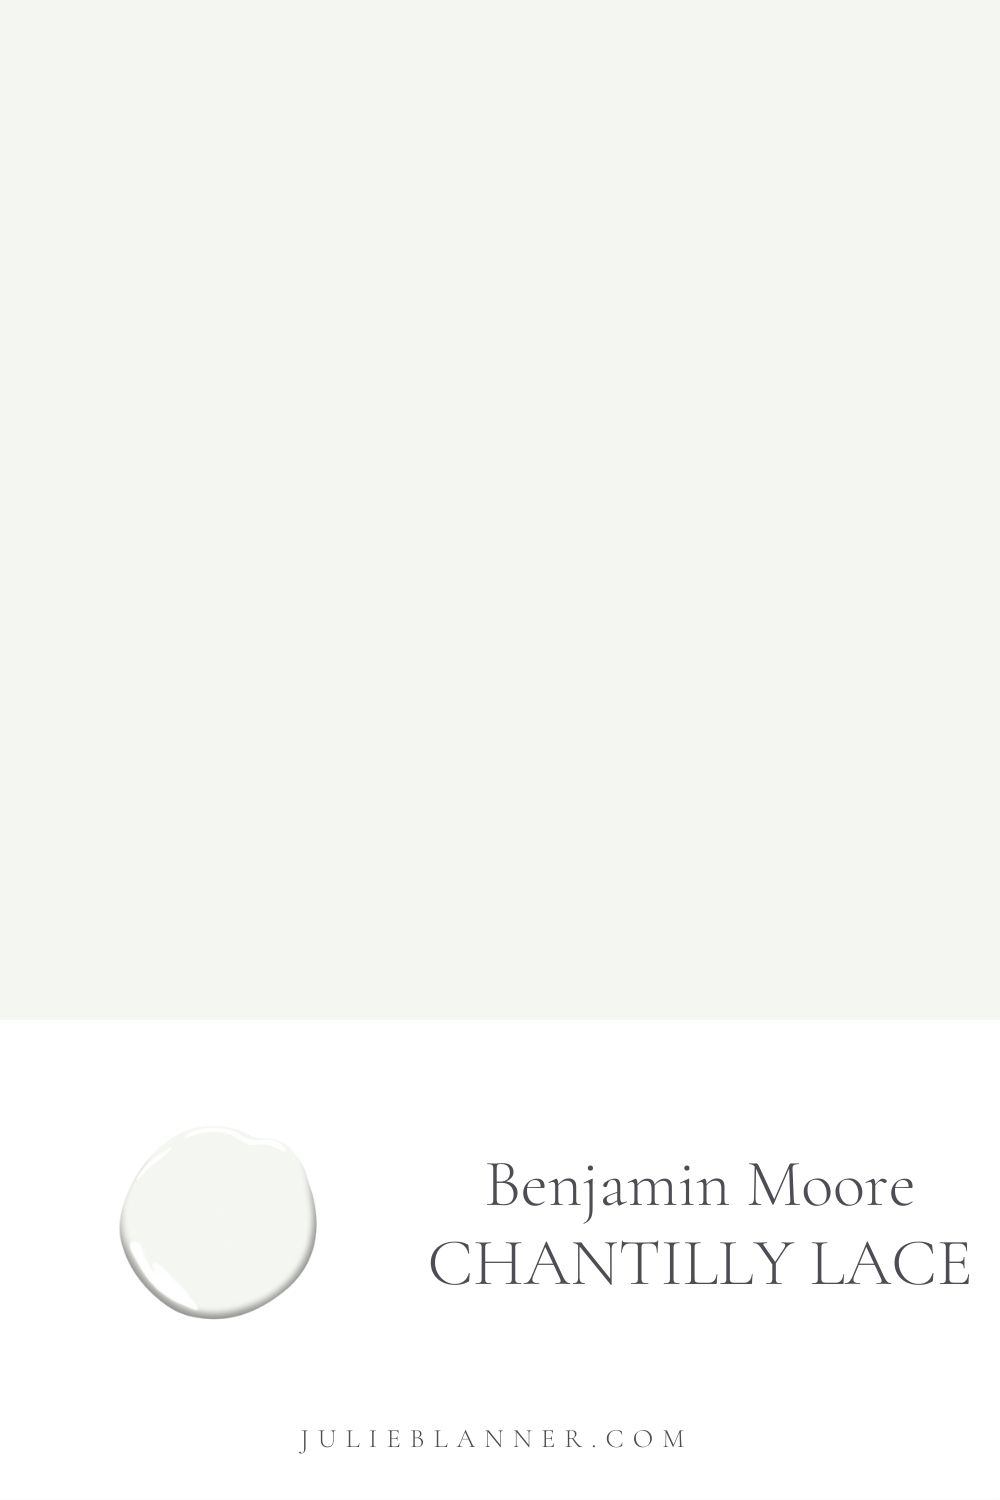 Benjamin Moore Chantilly Lace white paint color image